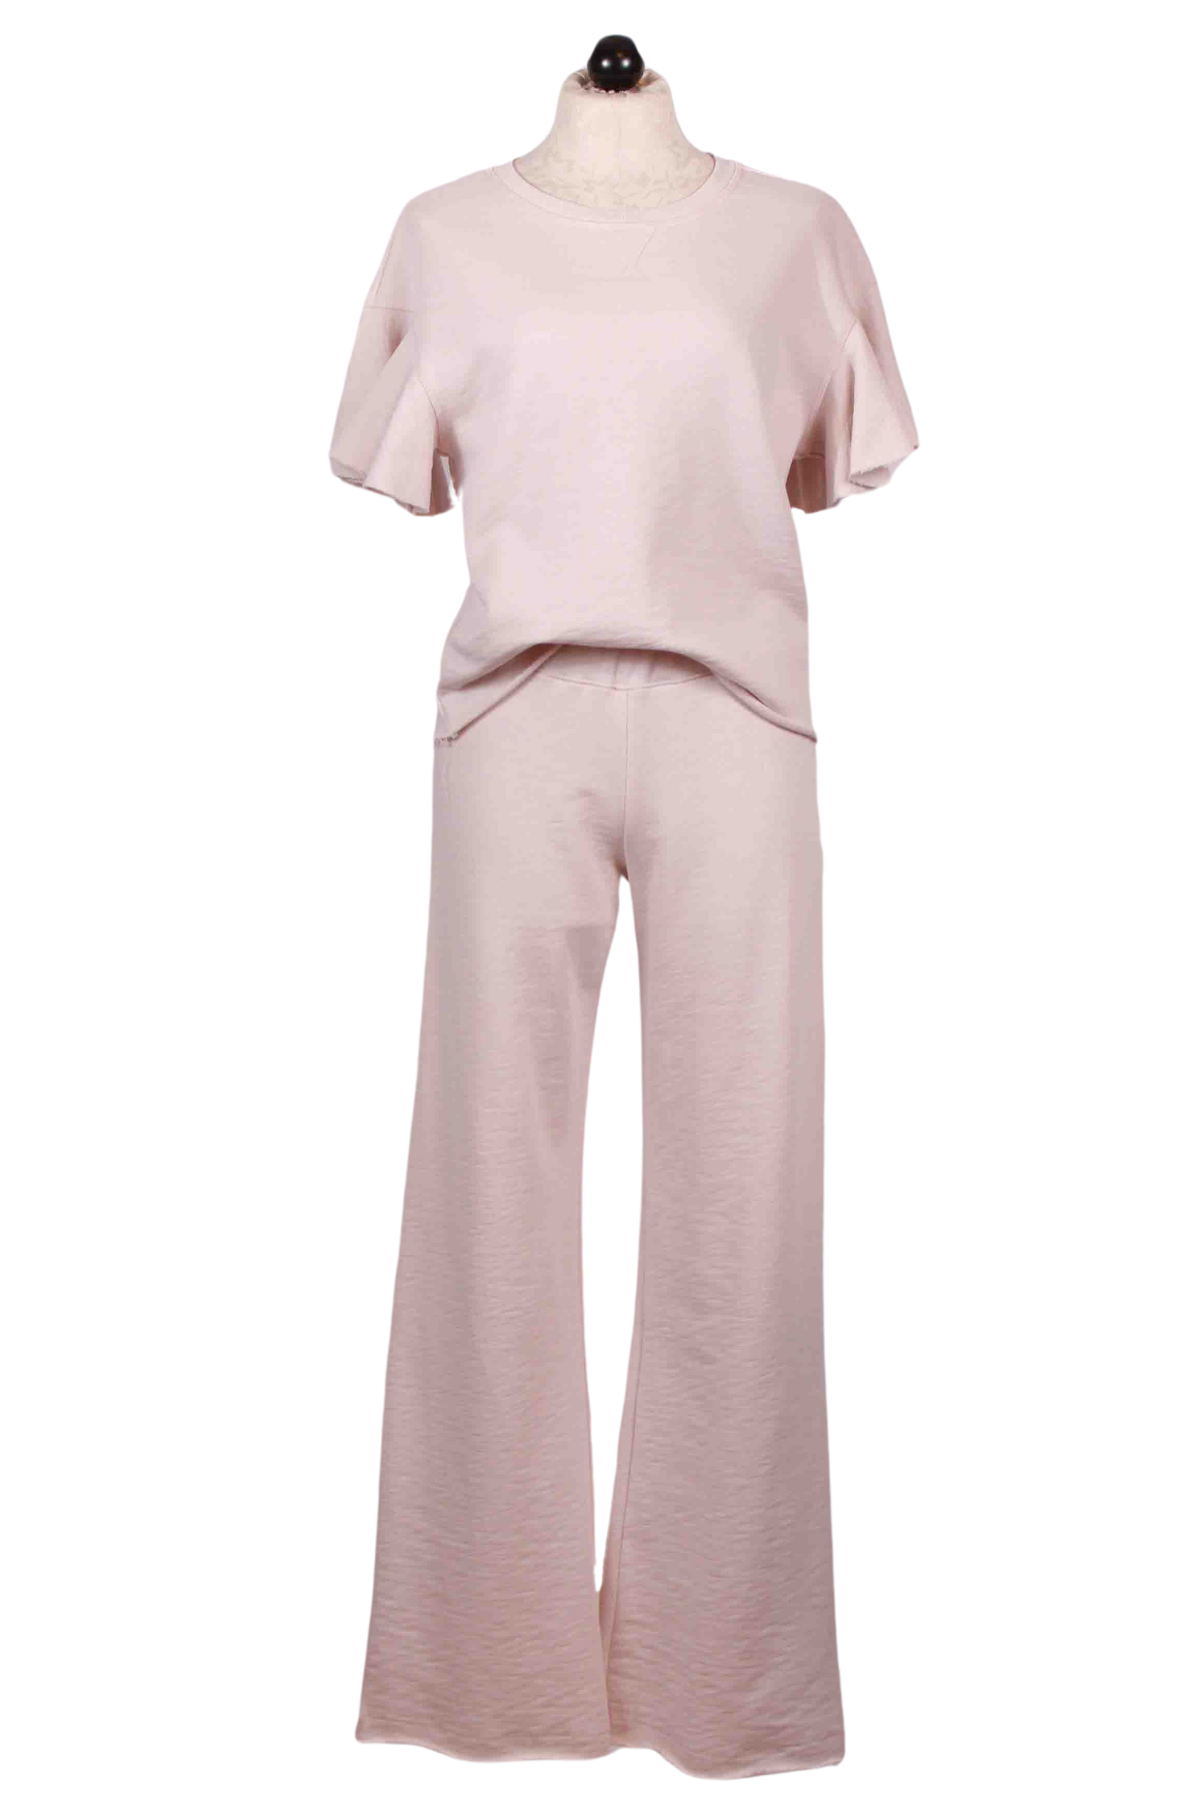 White Sand Big Ruffle Sleeve Melrose Top by Goldie LeWinter paired with the matching Easy Melrose Pants